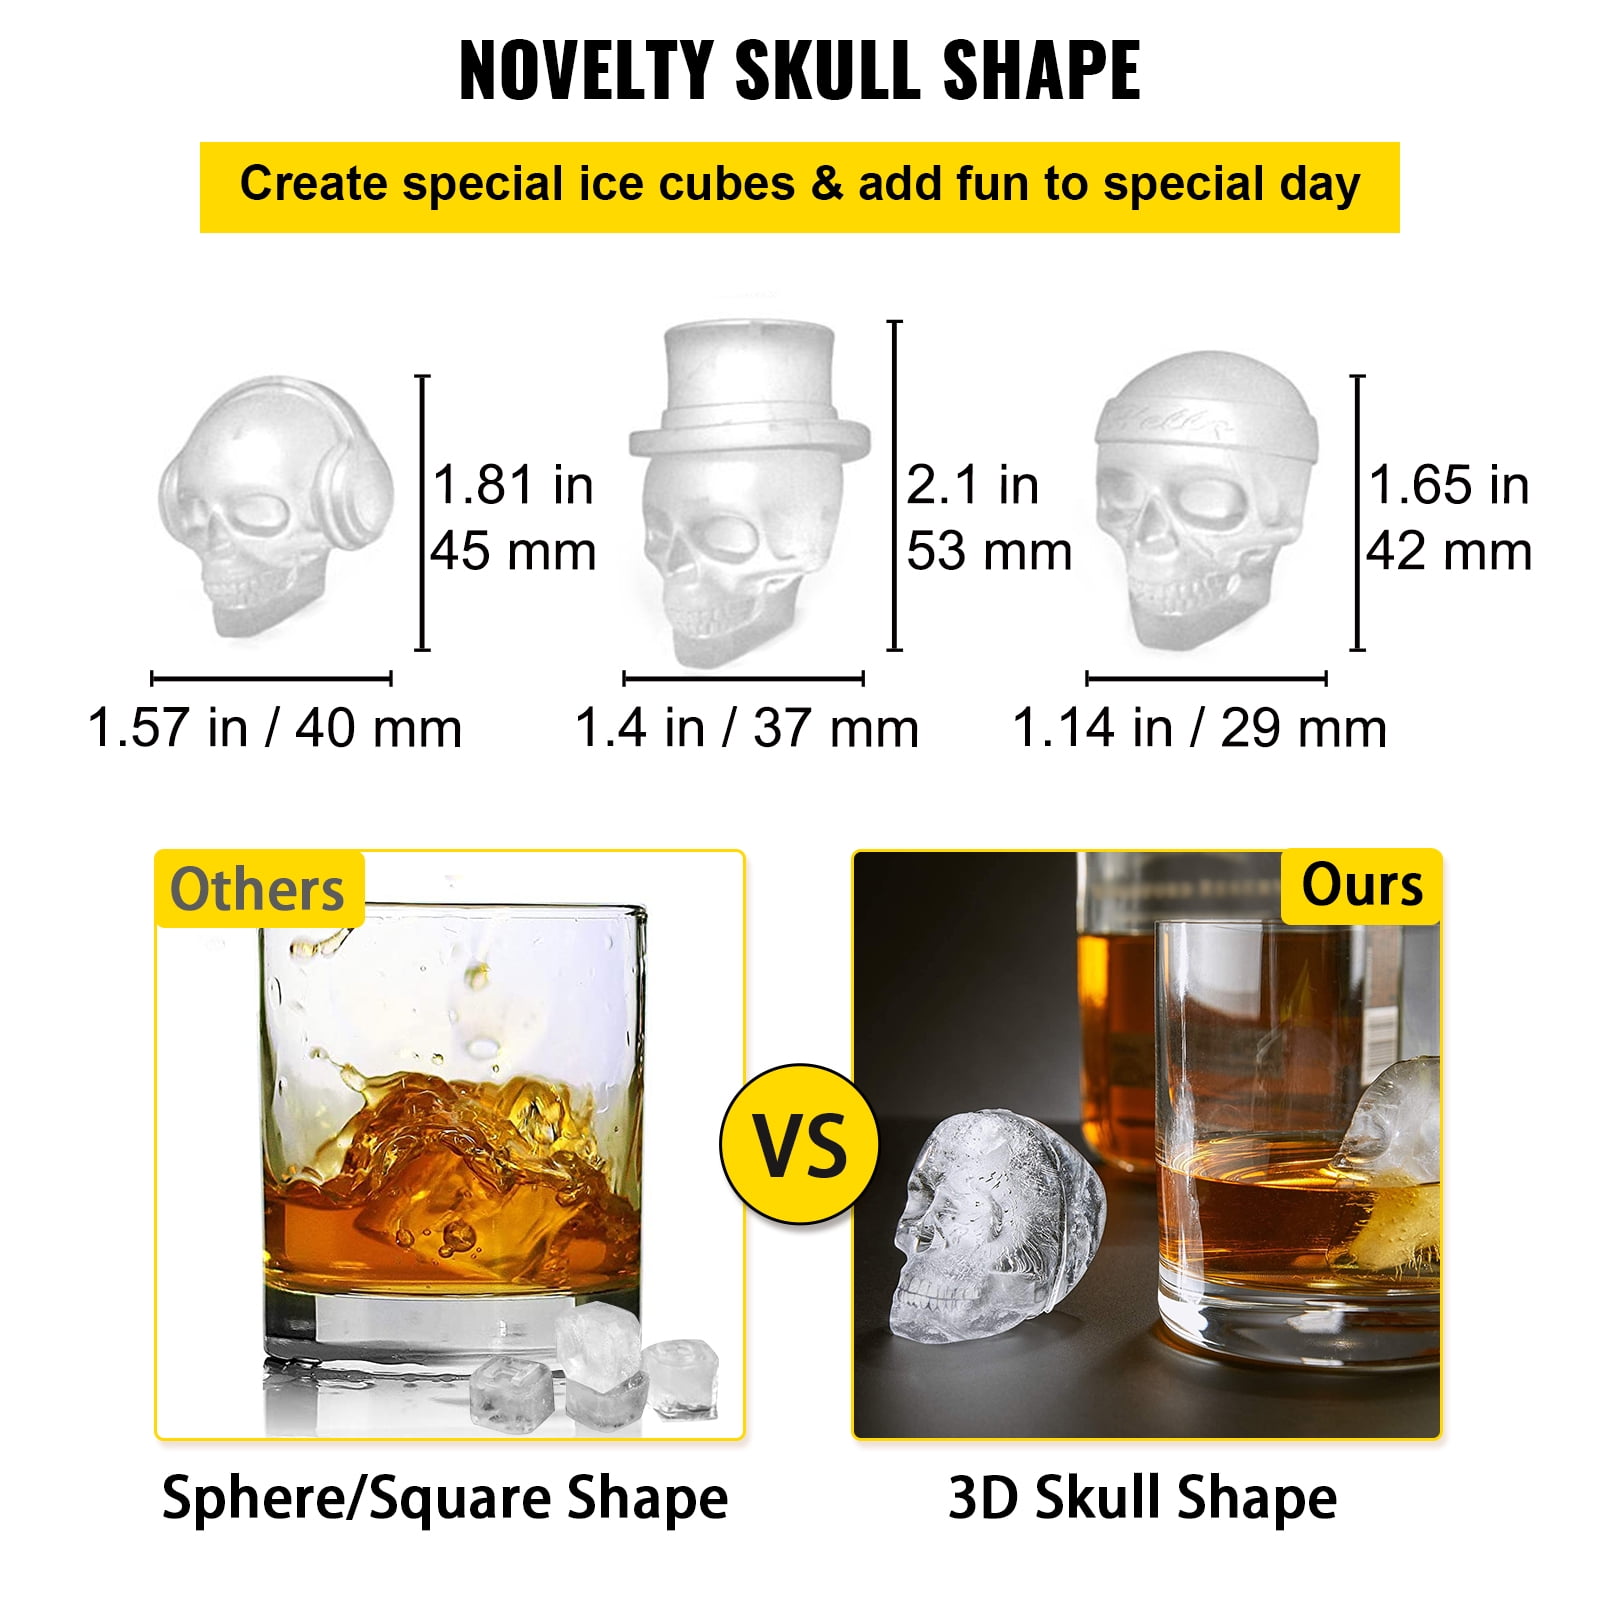 VEVOR Skull Ice Cube Tray, 4-Grid Skull Ice Ball Maker, Flexible Black  Silicone Ice Tray with Lid & Funnel, Funny Skull Ice Cubes 1.6x1.8 Each  for Beverage, Chocolate, etc. on Parties 